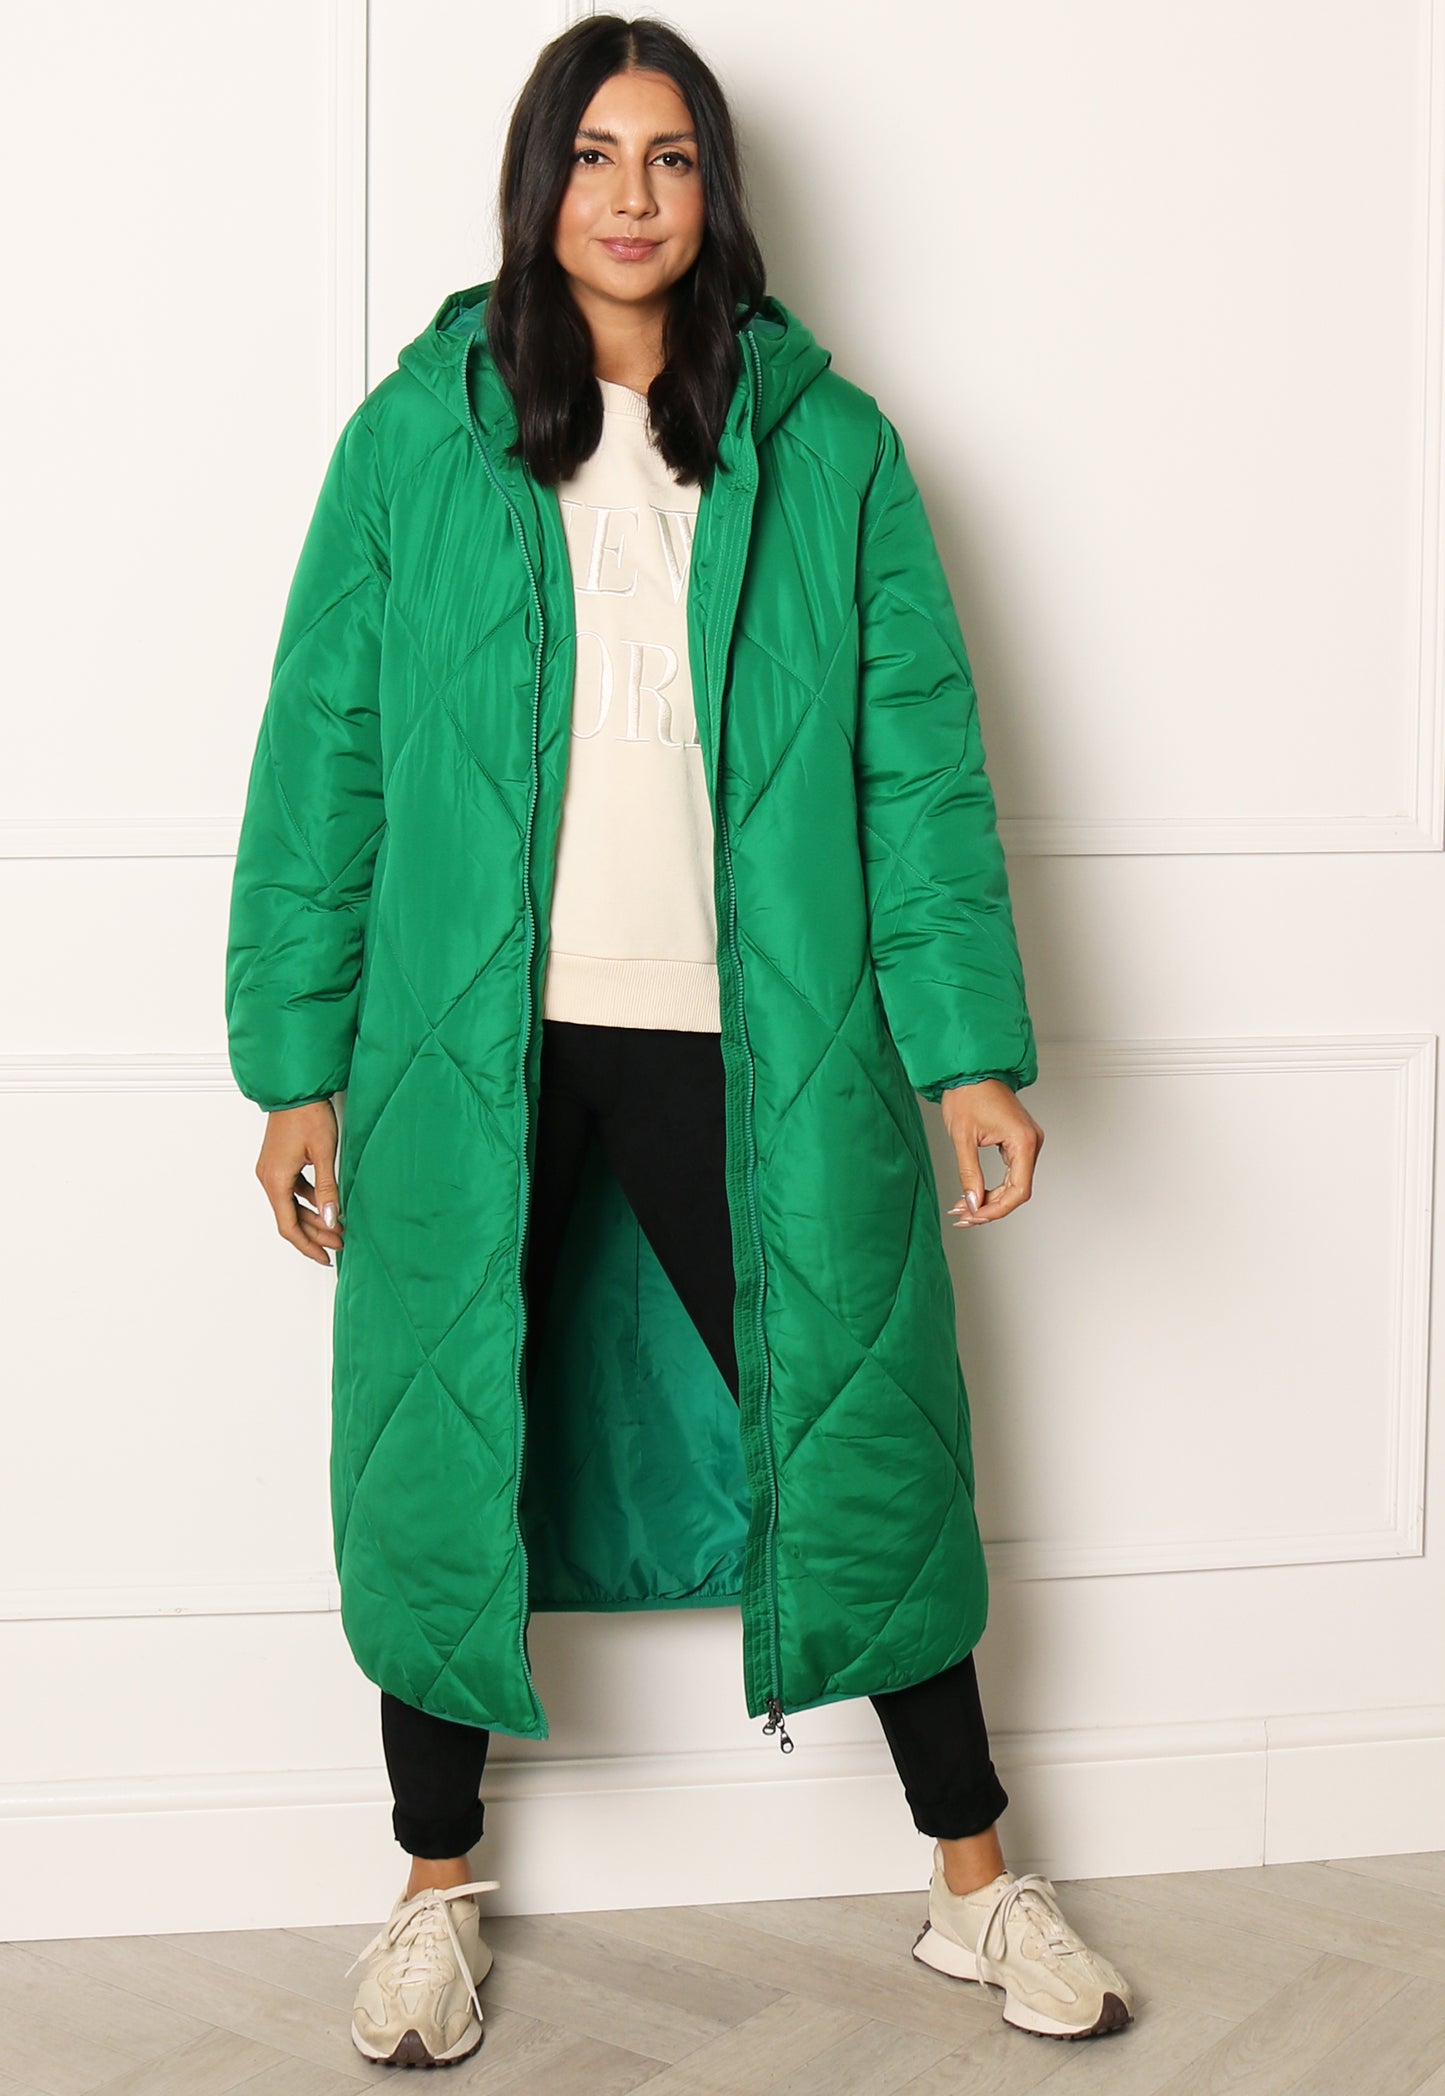 ONLY Tamara Maxi Diamond Quilted Longline Puffer Coat with Funnel Neck in Green - concretebartops